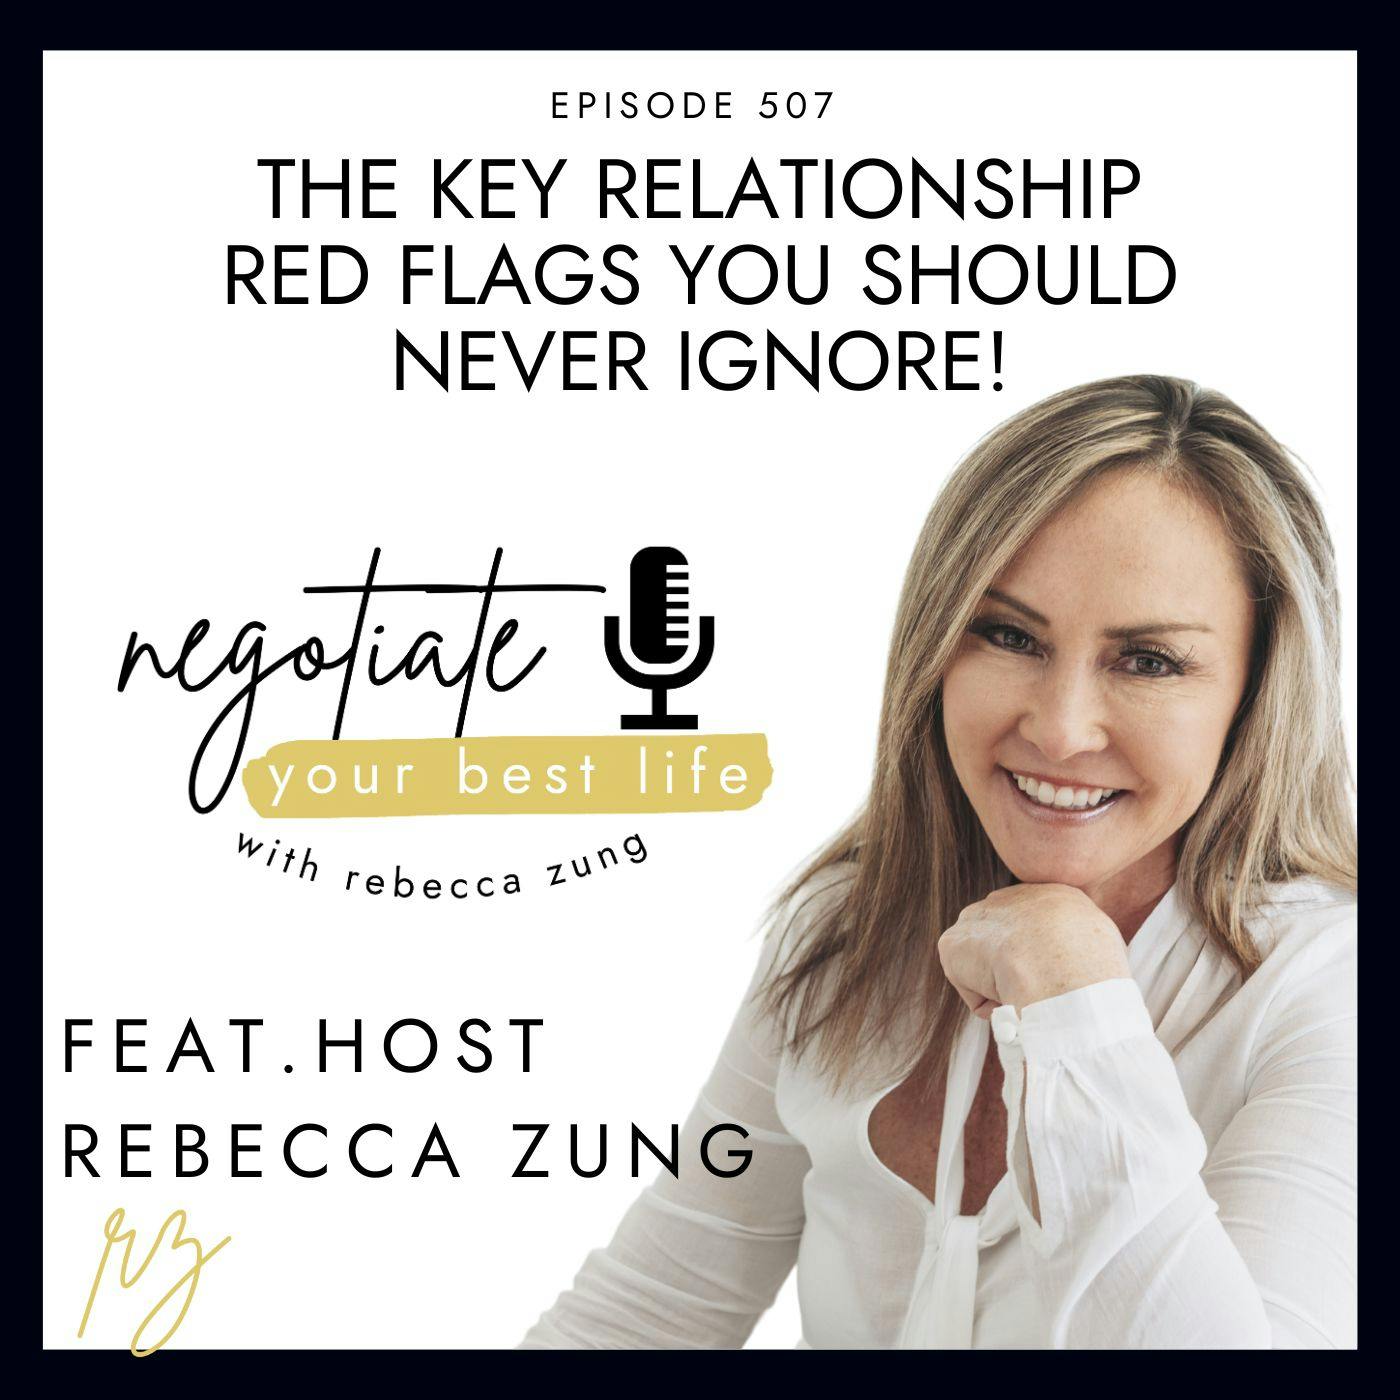 The Key Relationship RED FLAGS You Should NEVER Ignore! with Rebecca Zung on Negotiate Your Best Life #507